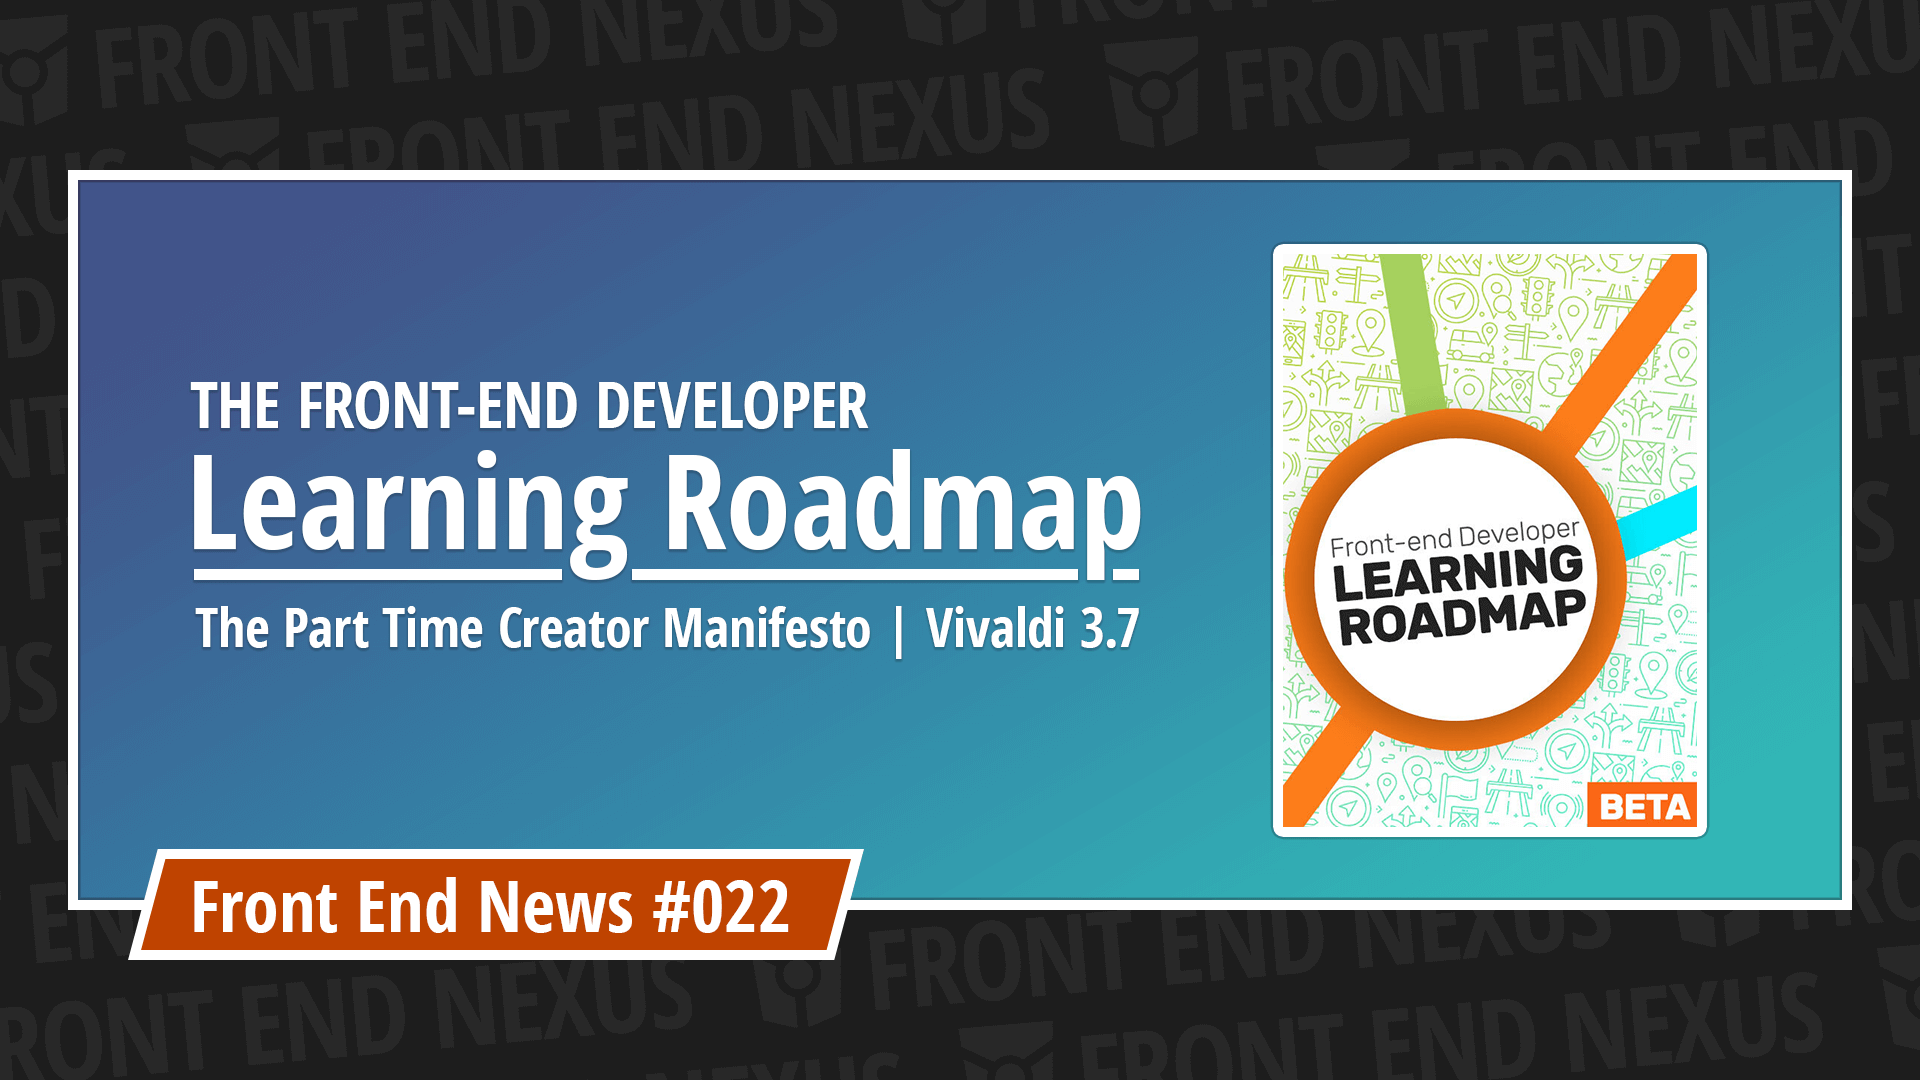 Front-End Developer Learning Roadmap, The Part Time Creator Manifesto, and Vivaldi 3.7 | Front End News #022